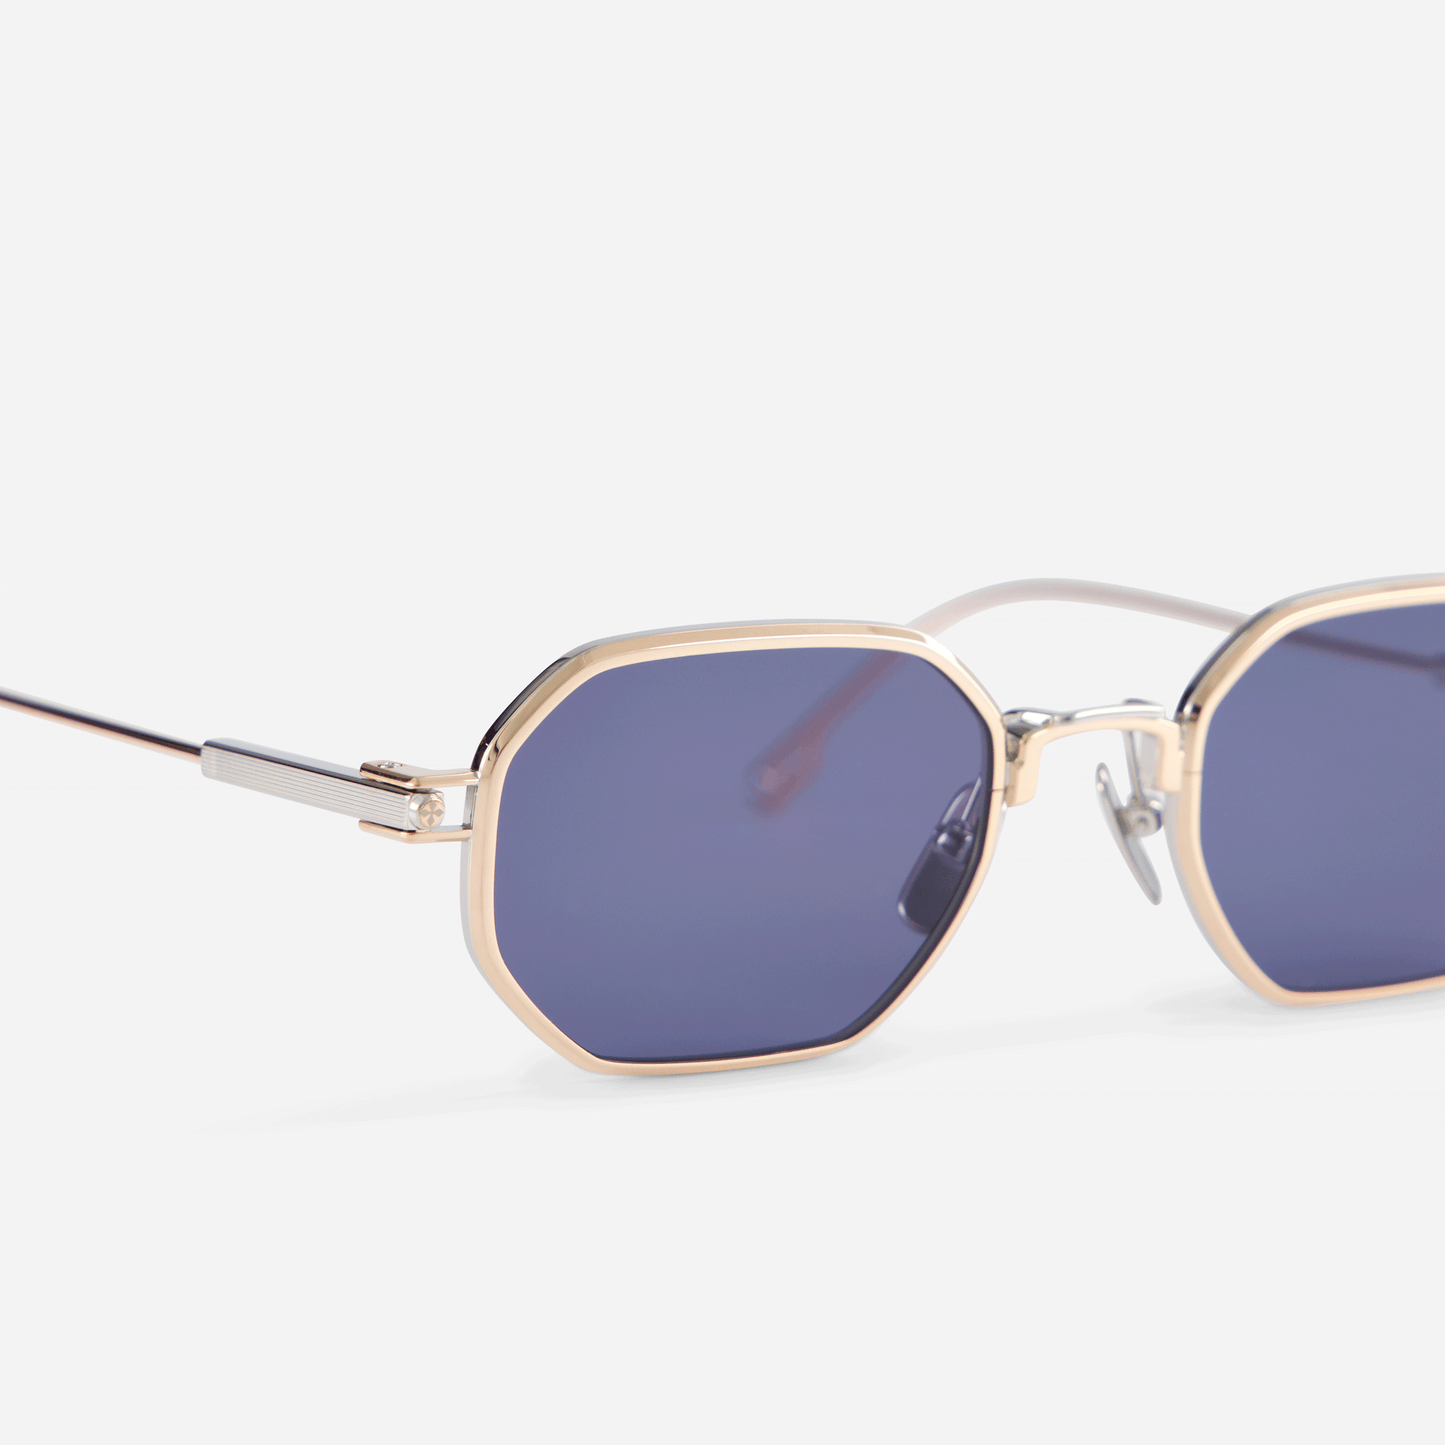 Timir S504 hexagonal glasses, part of the exclusive Sato SS23 collection. Made from pure Japanese titanium in Rose Gold and Platinum, these glasses showcase blue-tinted lenses that effortlessly complement the style of both men and women.